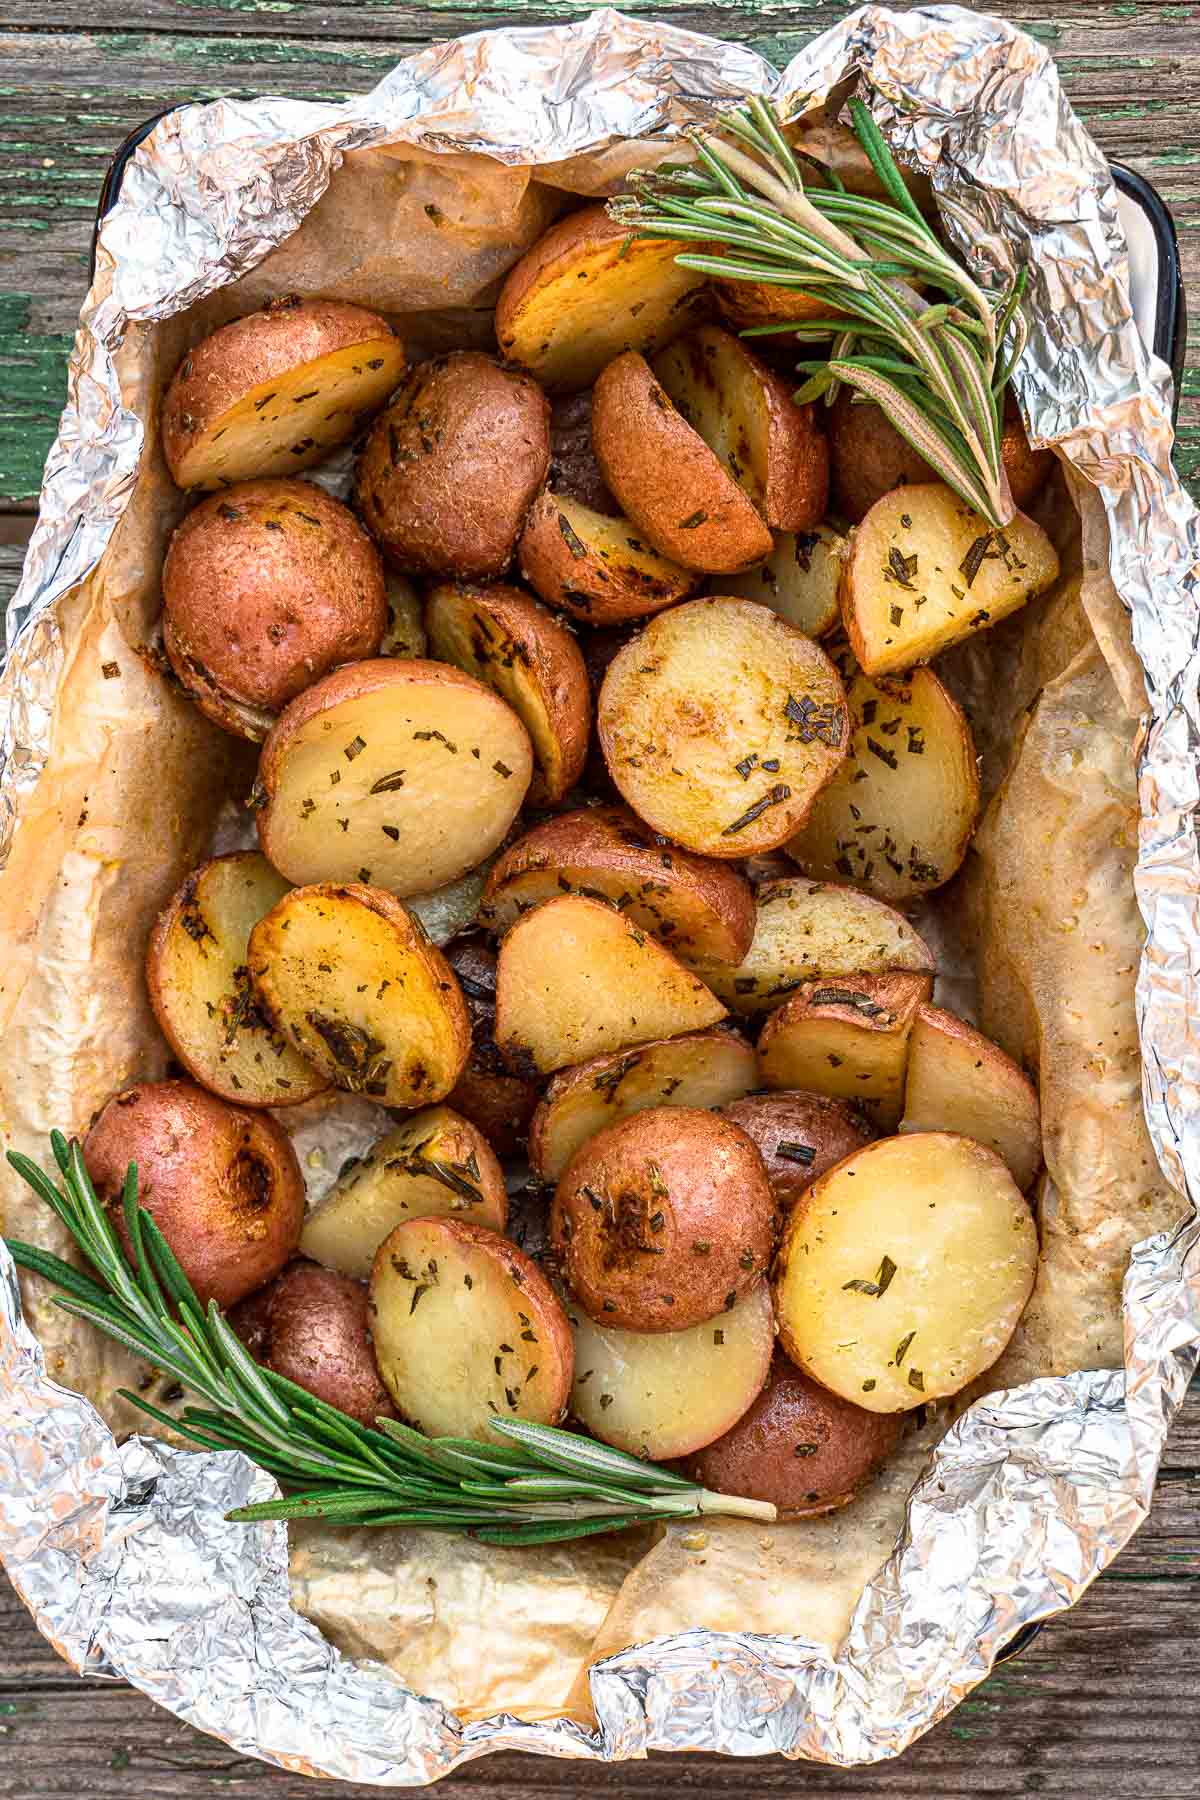 Grilled potatoes in foil garnished with rosemary sprigs